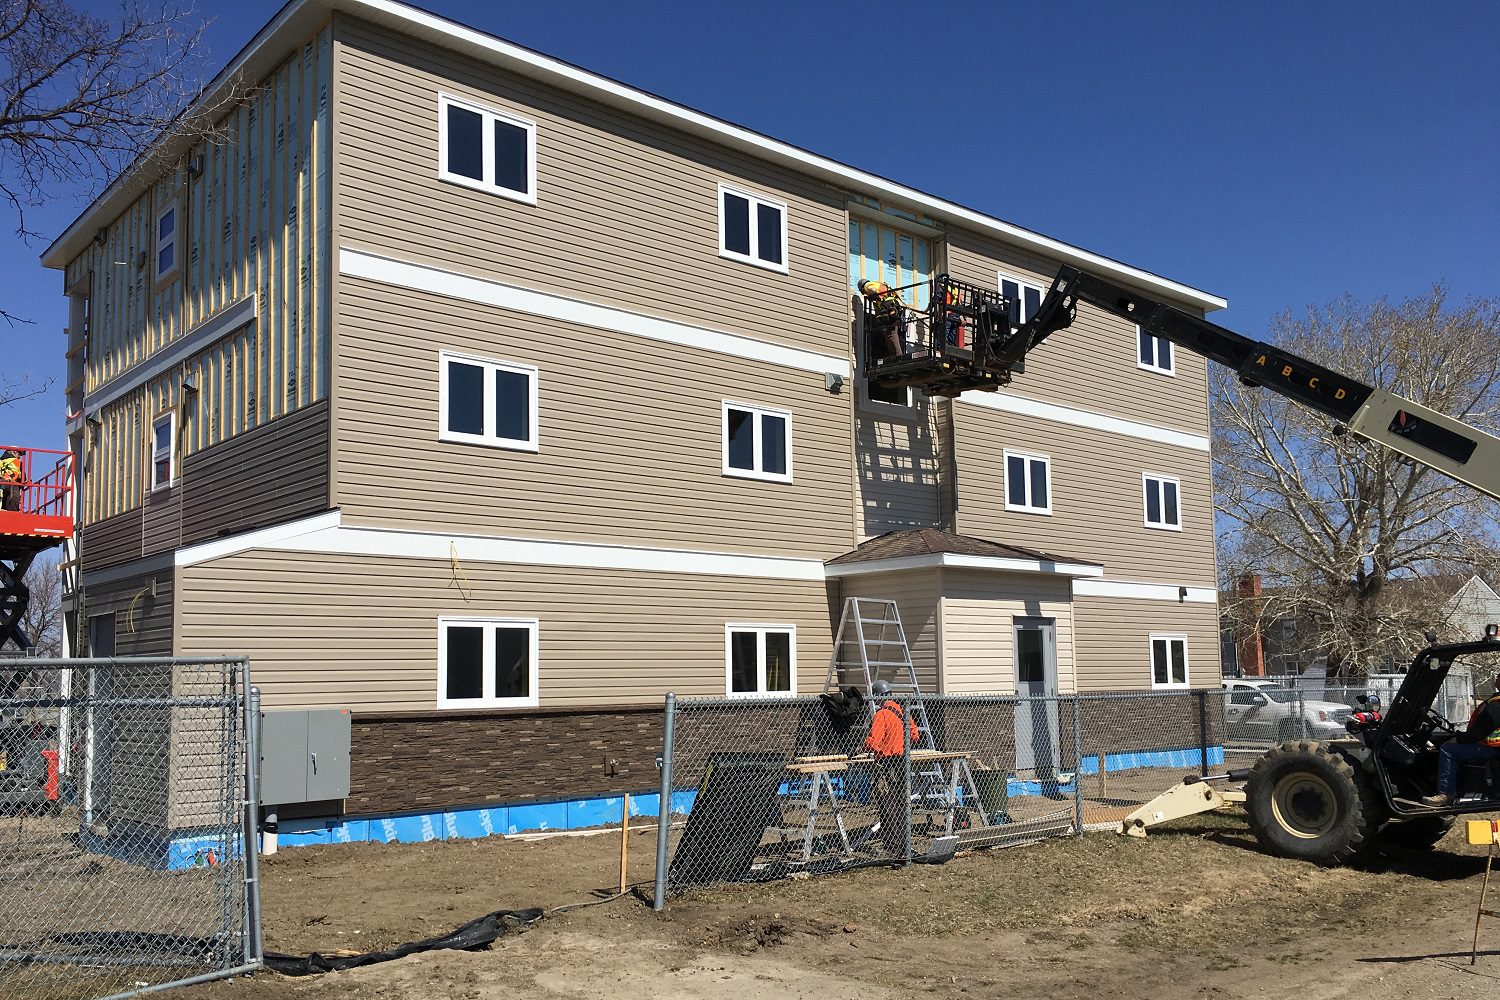 Construction workers installing siding on apartment building